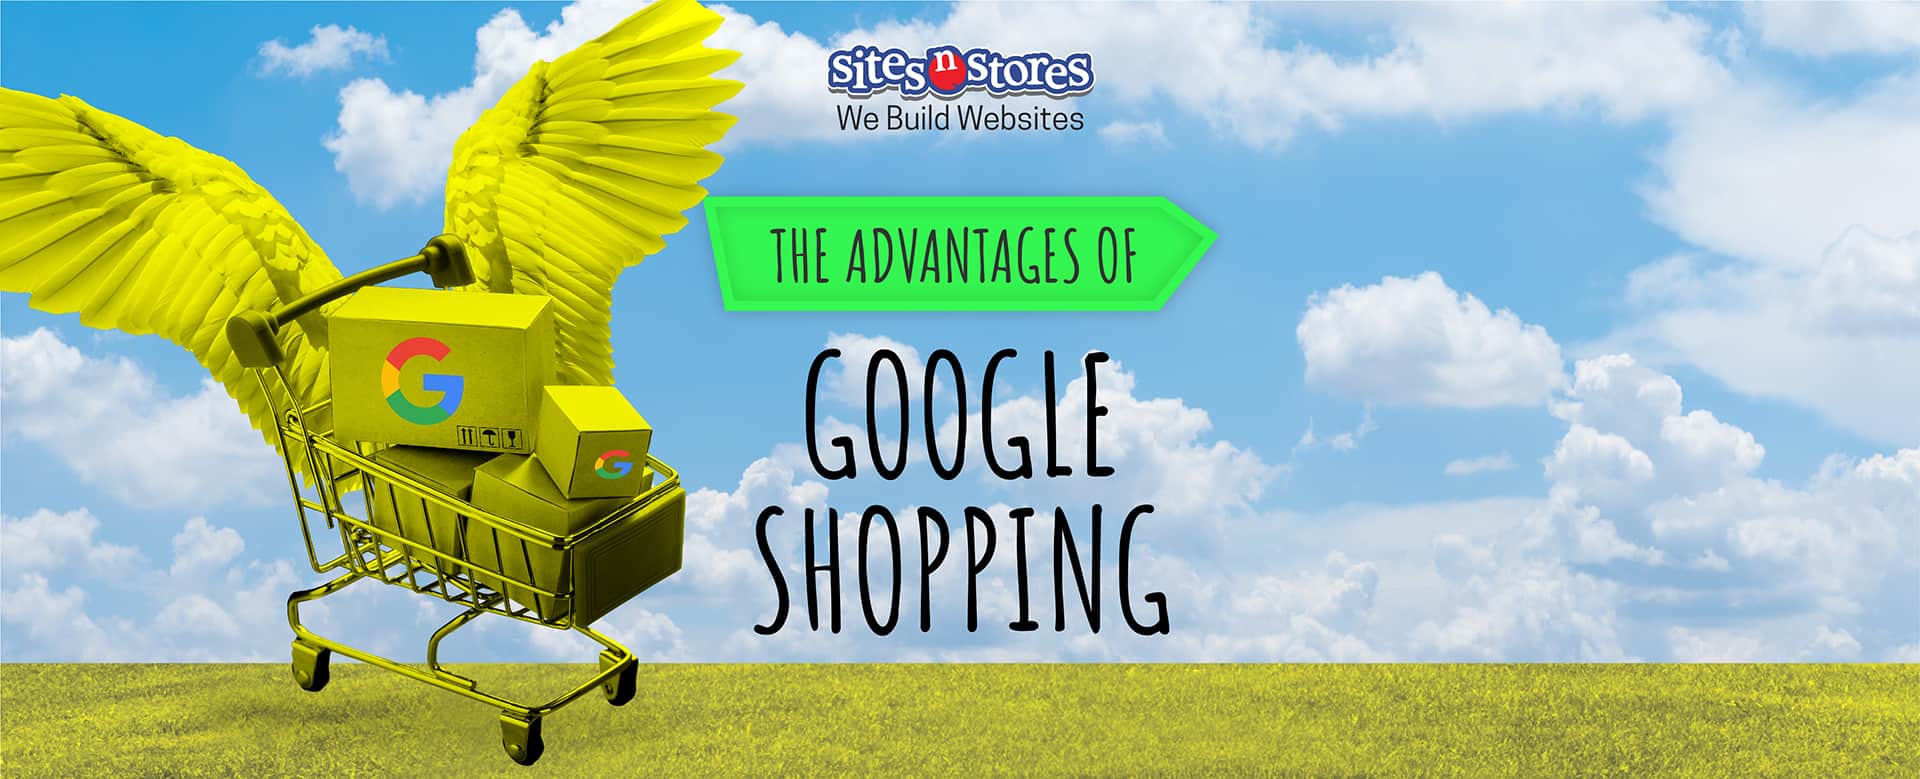 The Advantages of Google Shopping